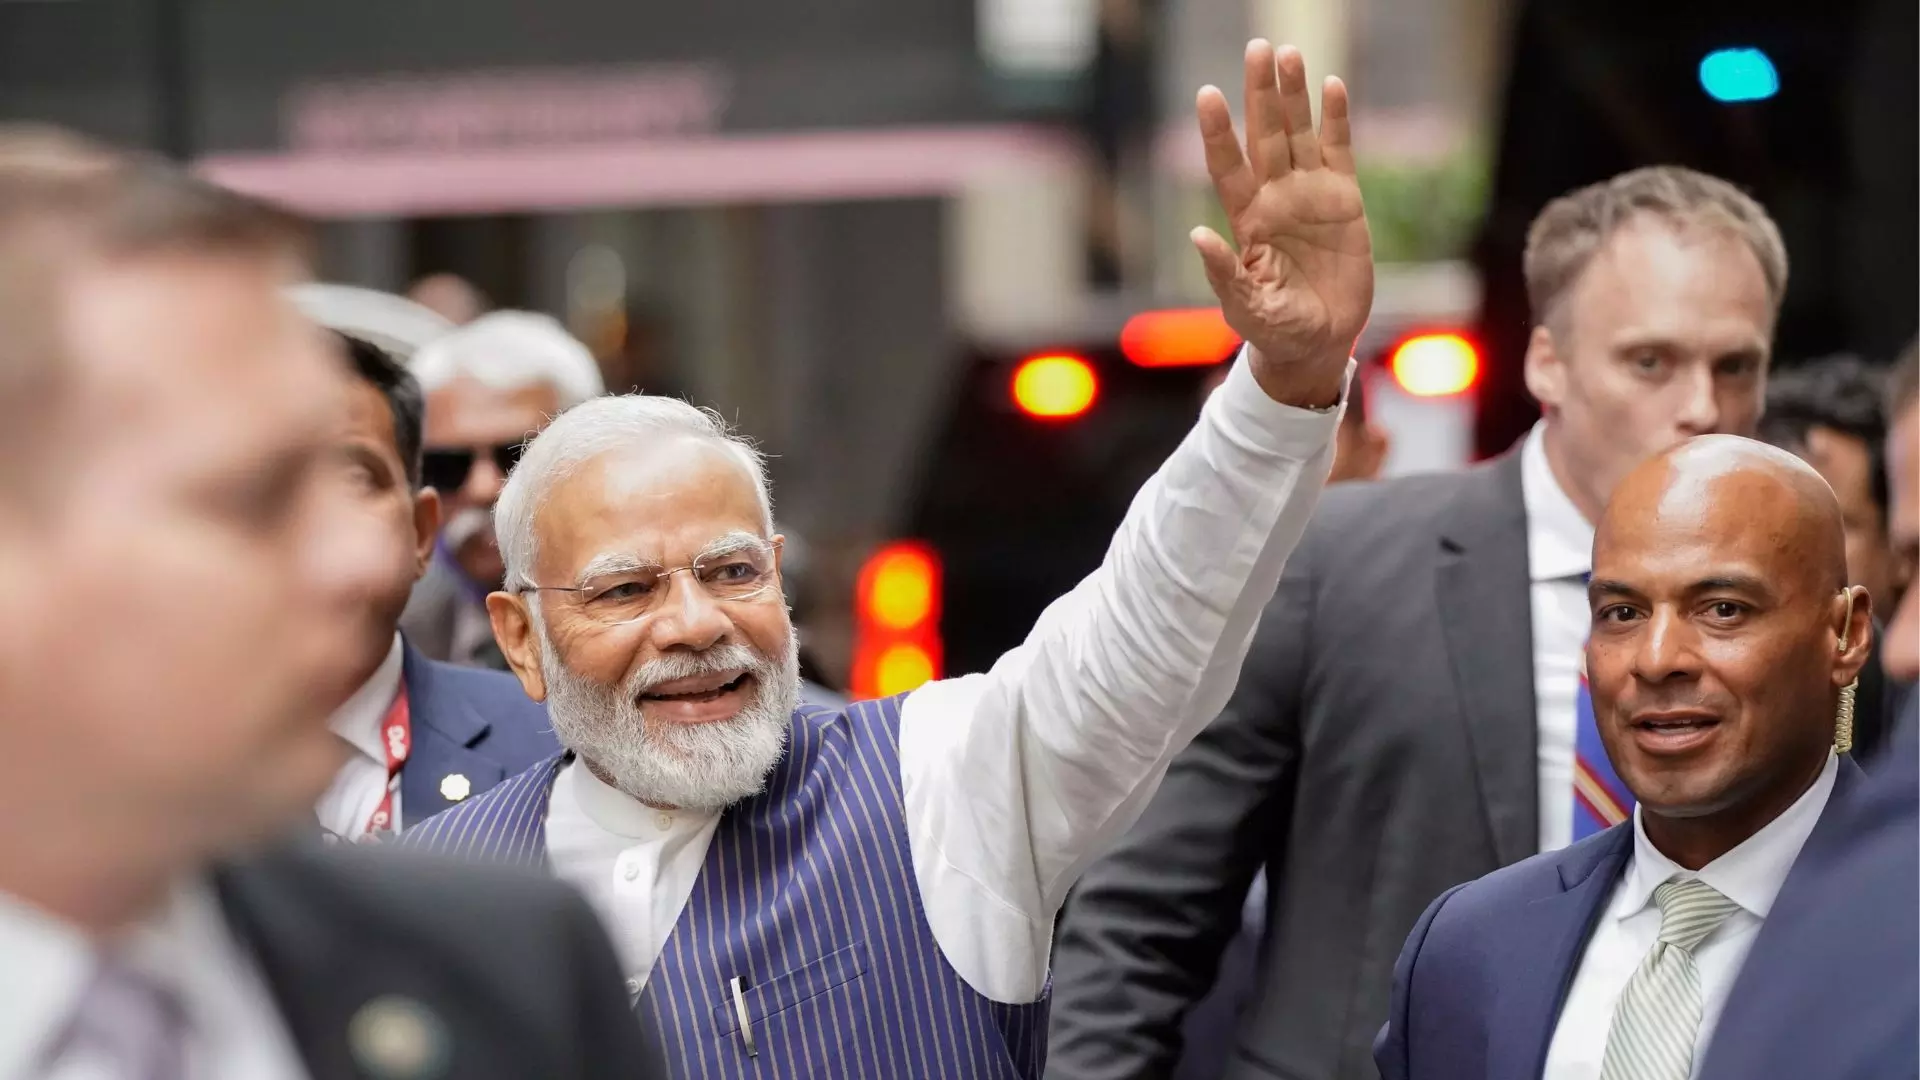 PM Modi discusses Indias growth story with top American thought leaders in New York